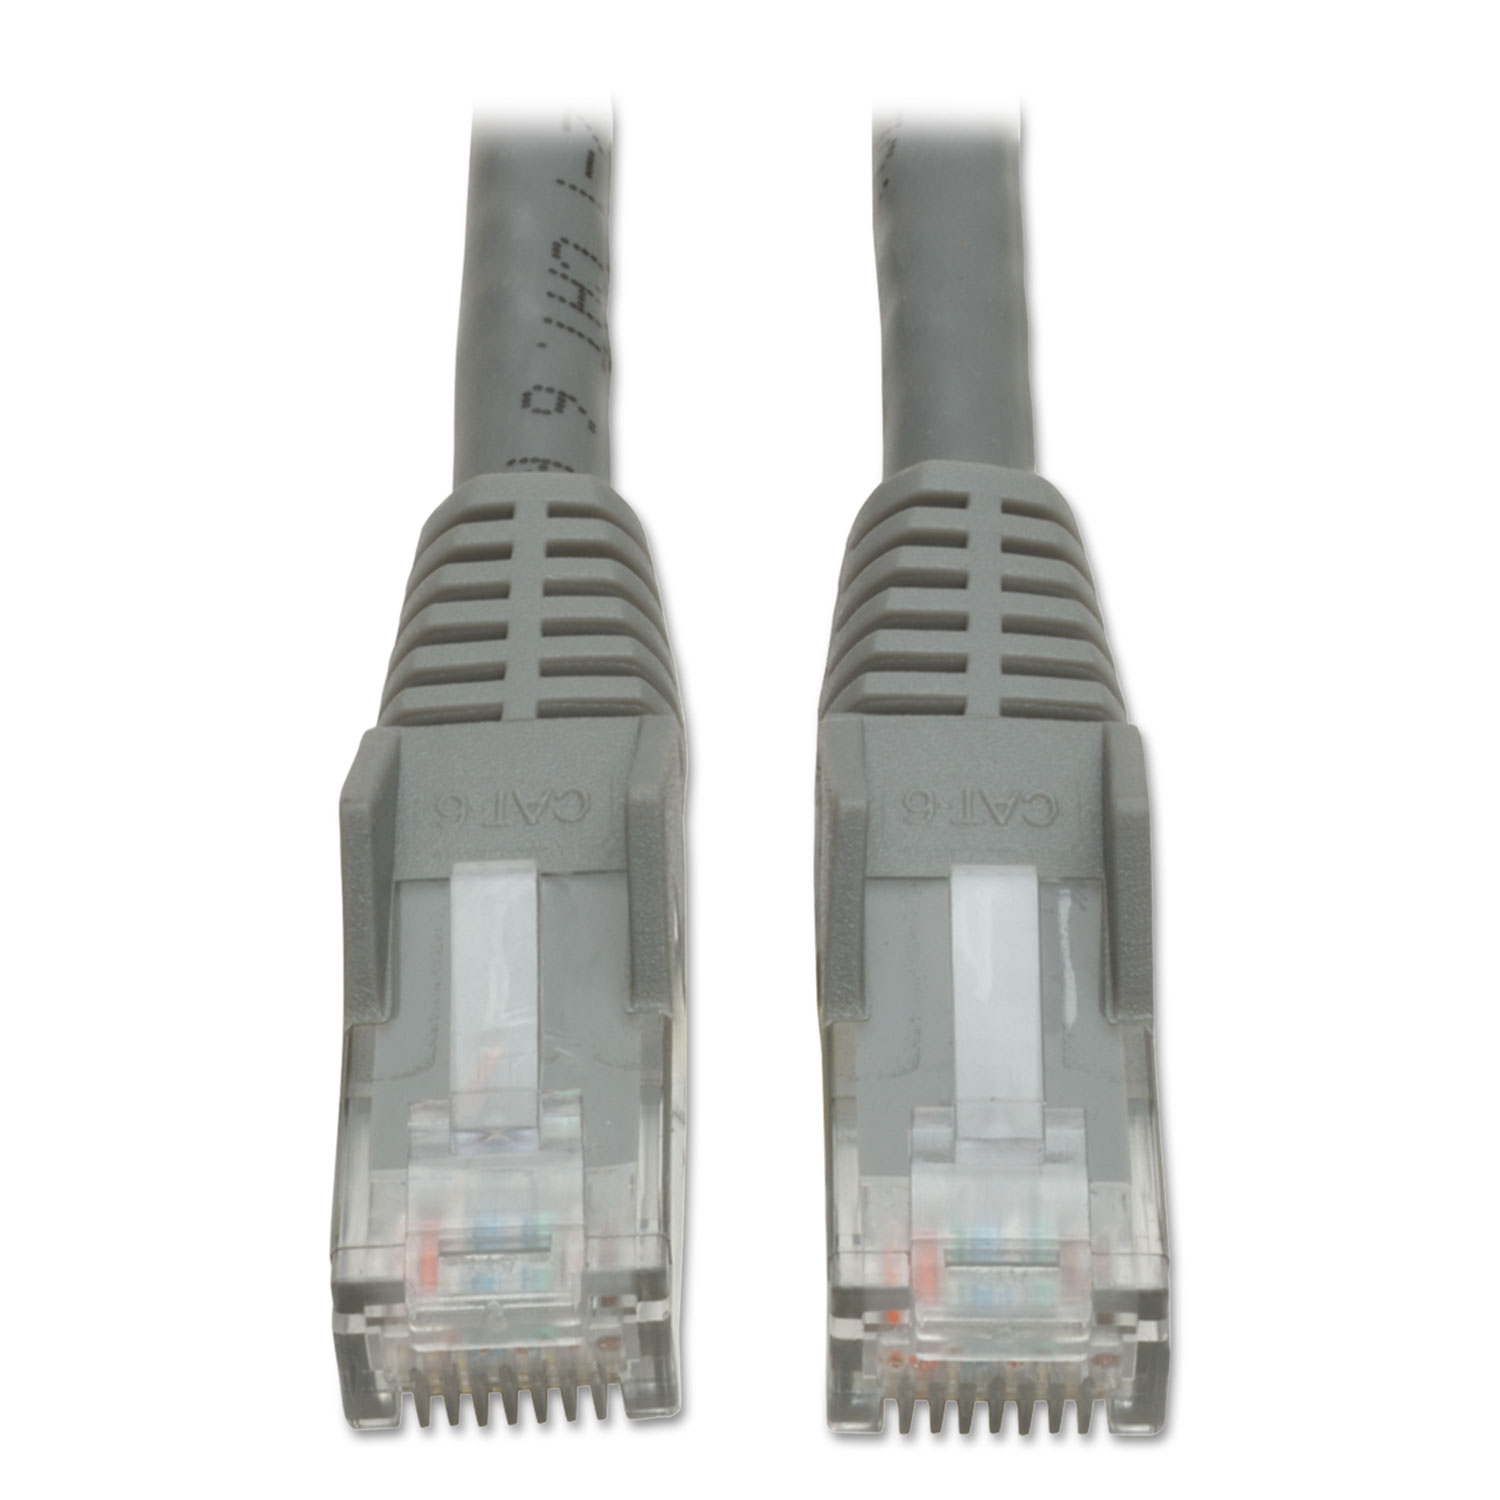  Tripp Lite N201-005-GY Cat6 Gigabit Snagless Molded Patch Cable, RJ45 (M/M), 5 ft., Gray (TRPN201005GY) 